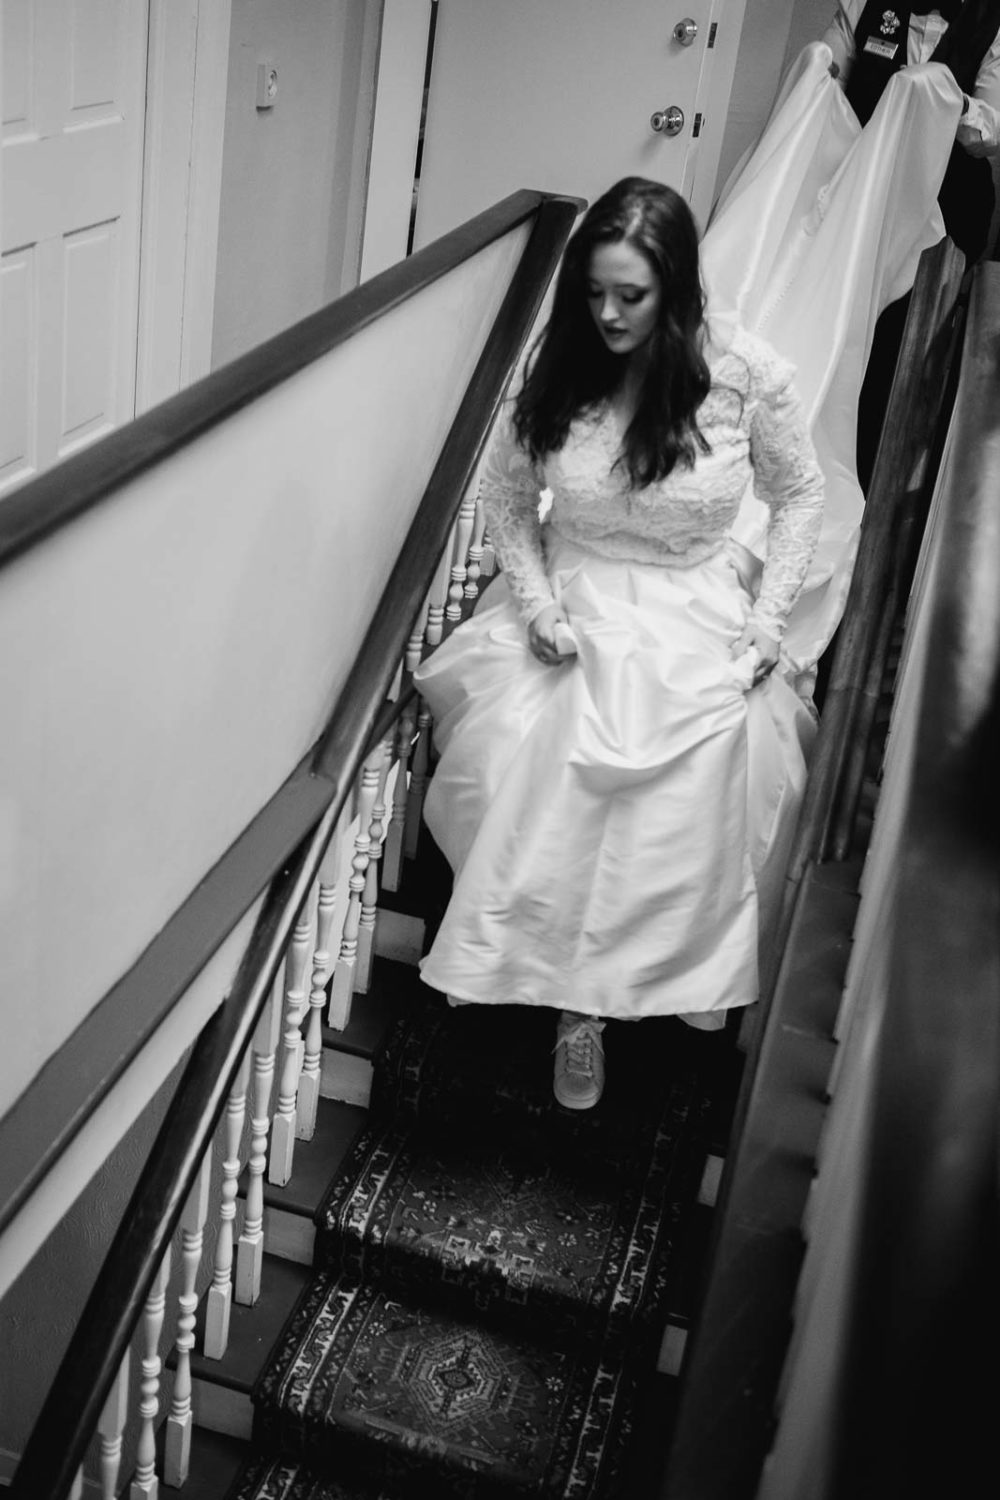 The bride makes her way down a narrow staircase 